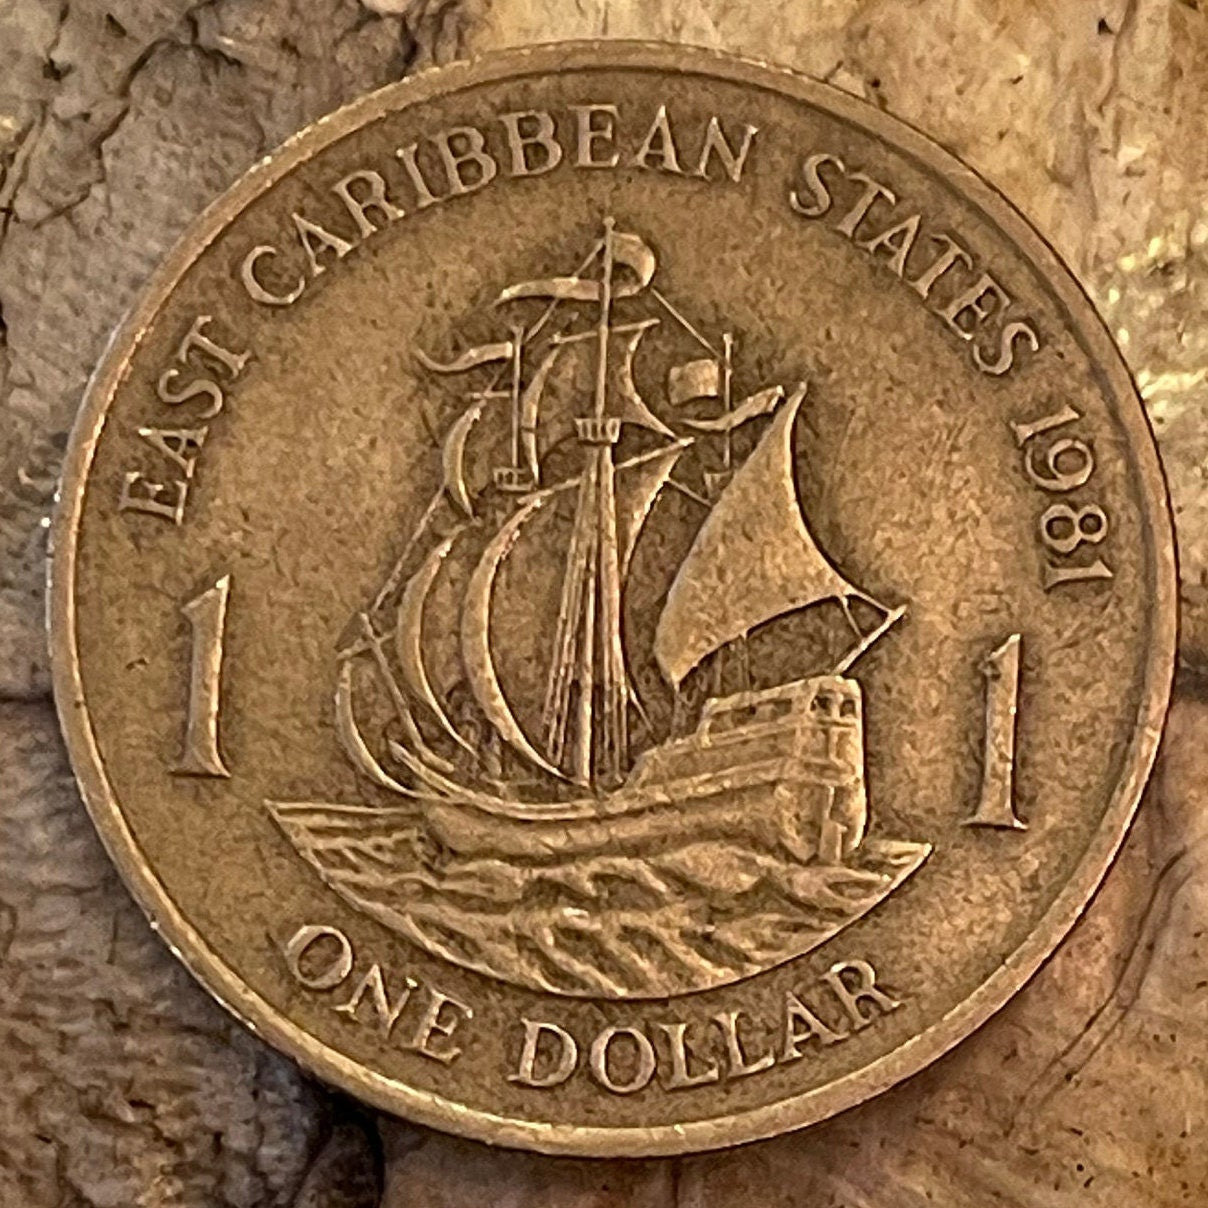 Golden Hind Galleon of Sir Francis Drake 1 Dollar East Caribbean States Authentic Coin Money for Jewelry and Crafts (CONDITION: VERY FINE)